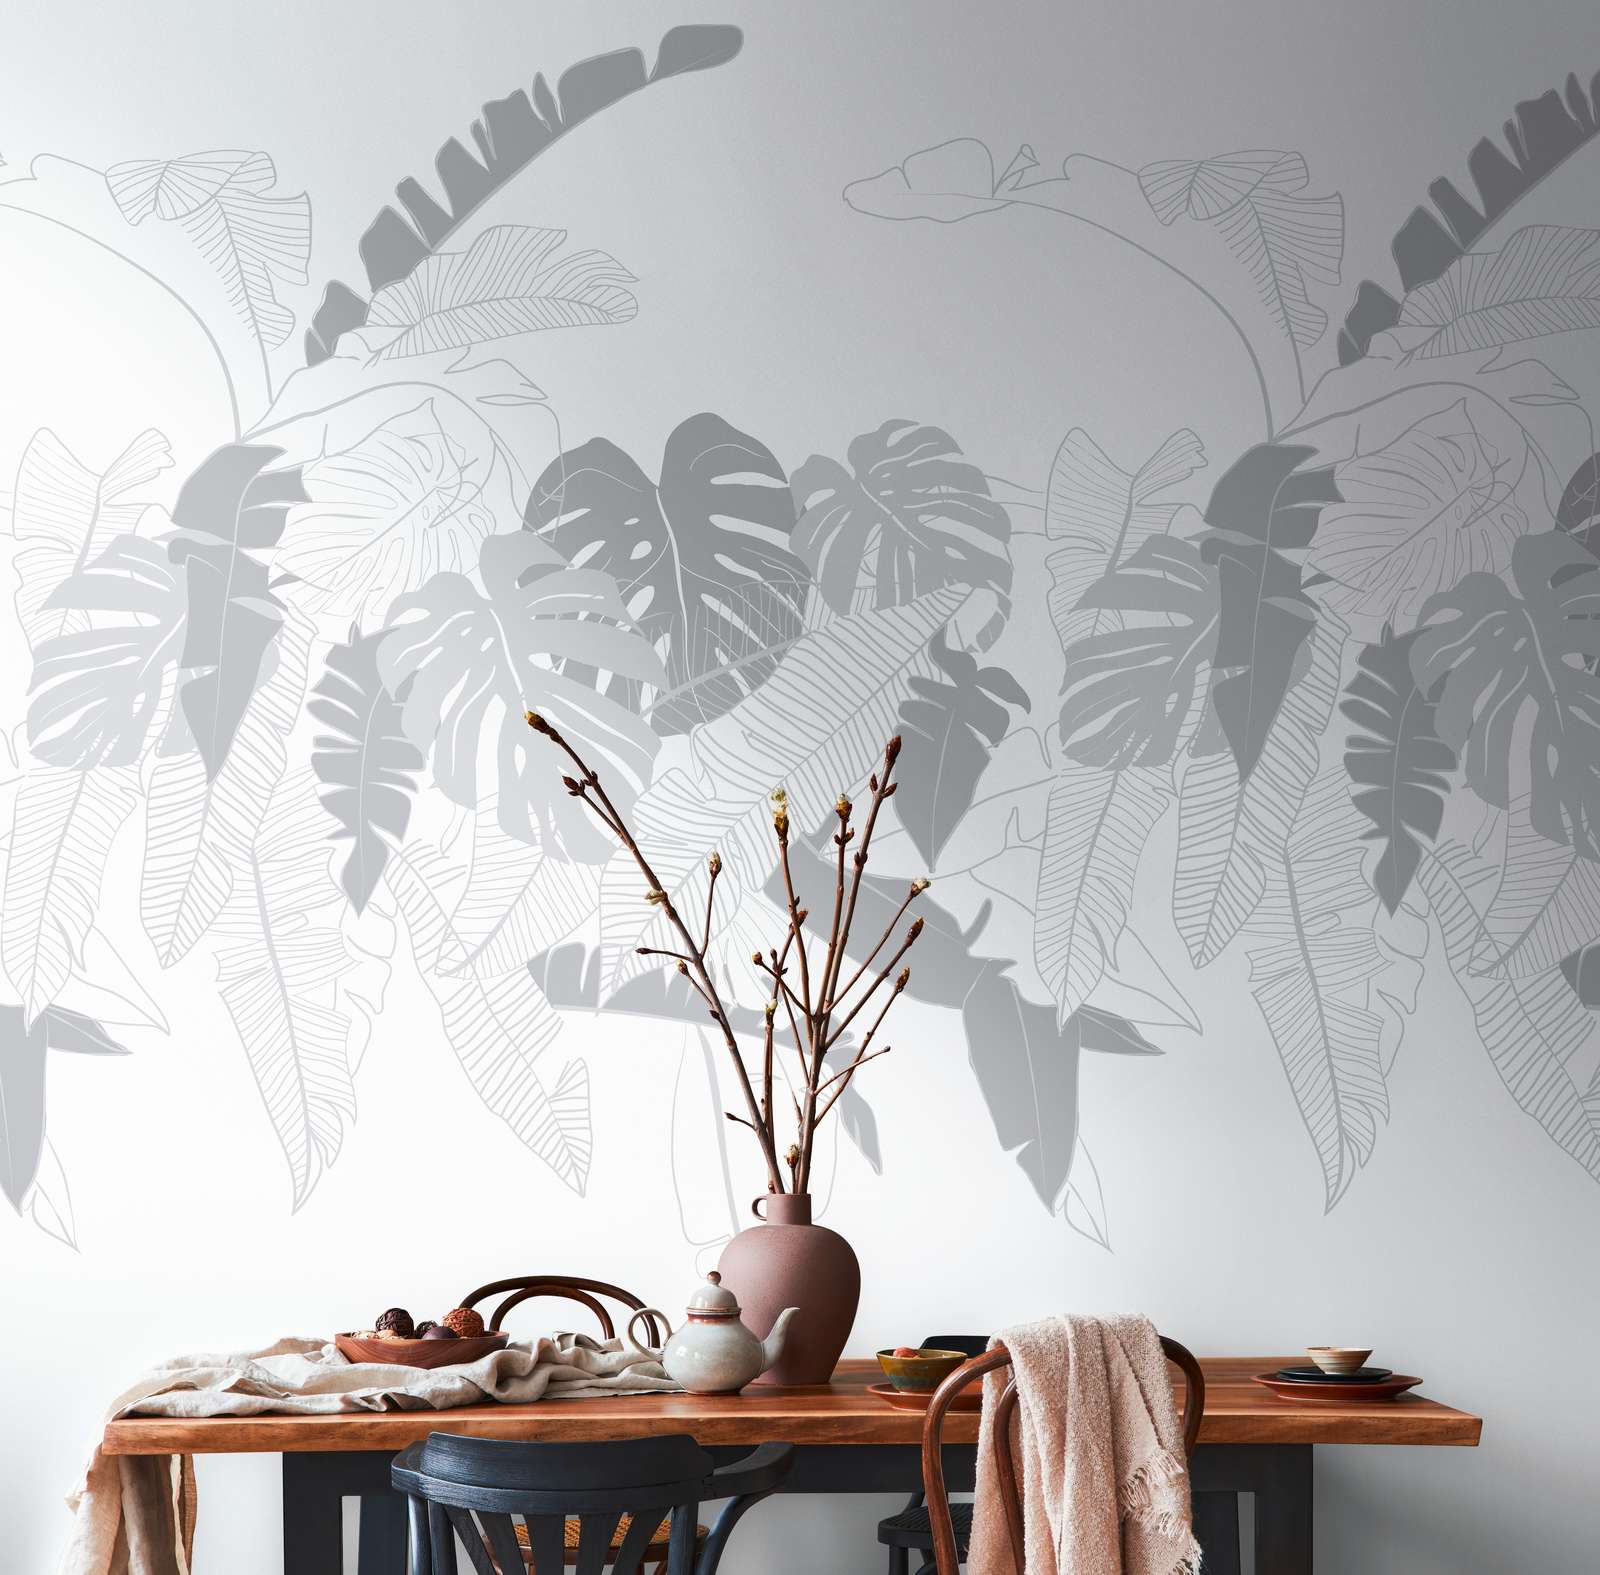             Jungle wallpaper with palm leaf motif - white, grey
        